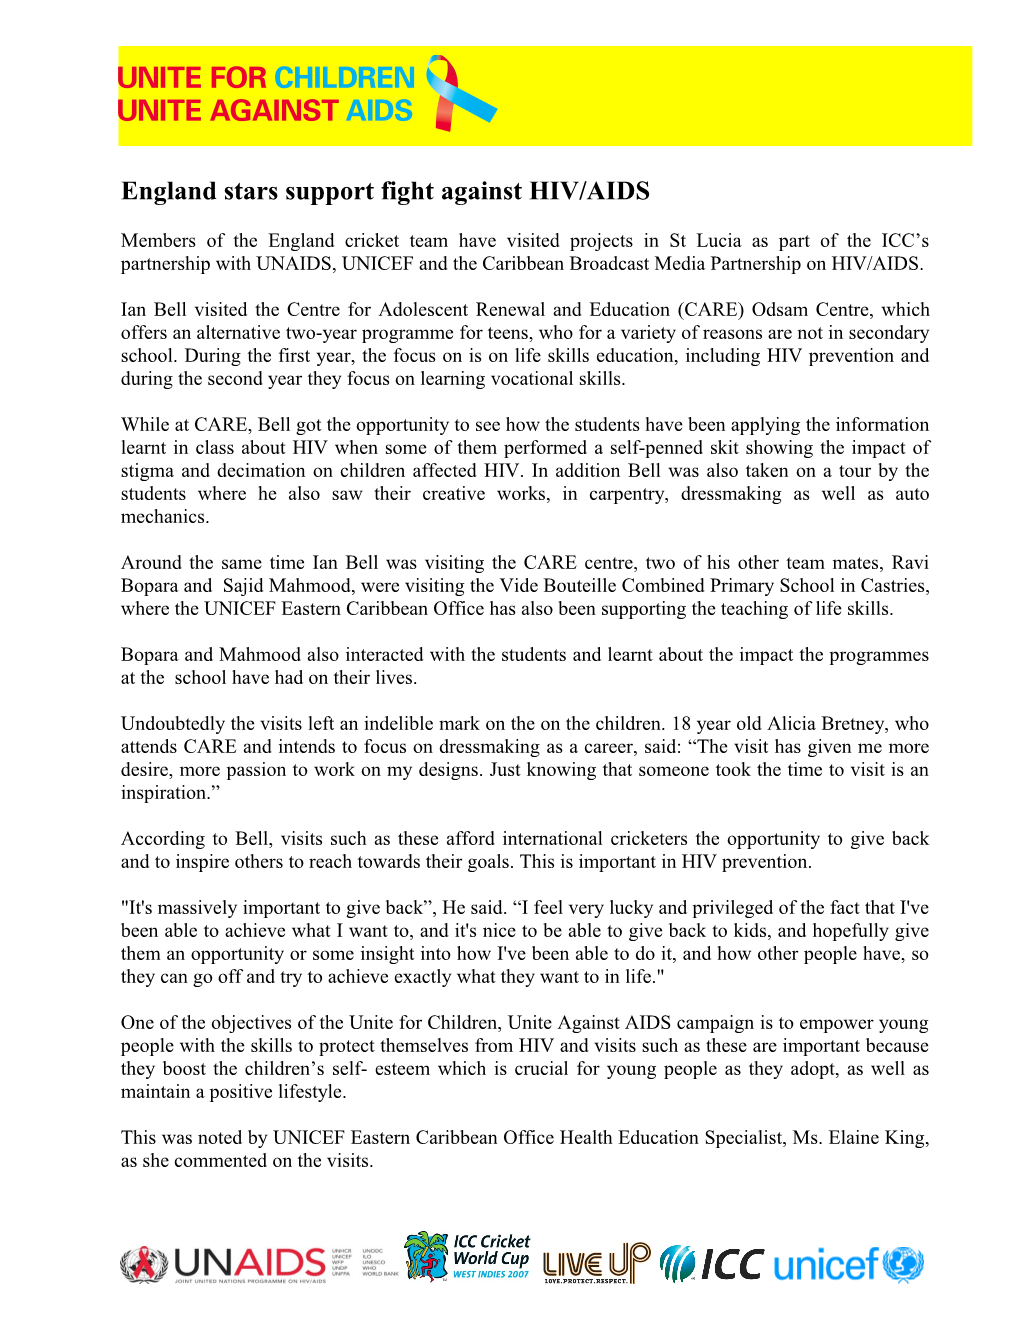 England Stars Support Fight Against HIV/AIDS